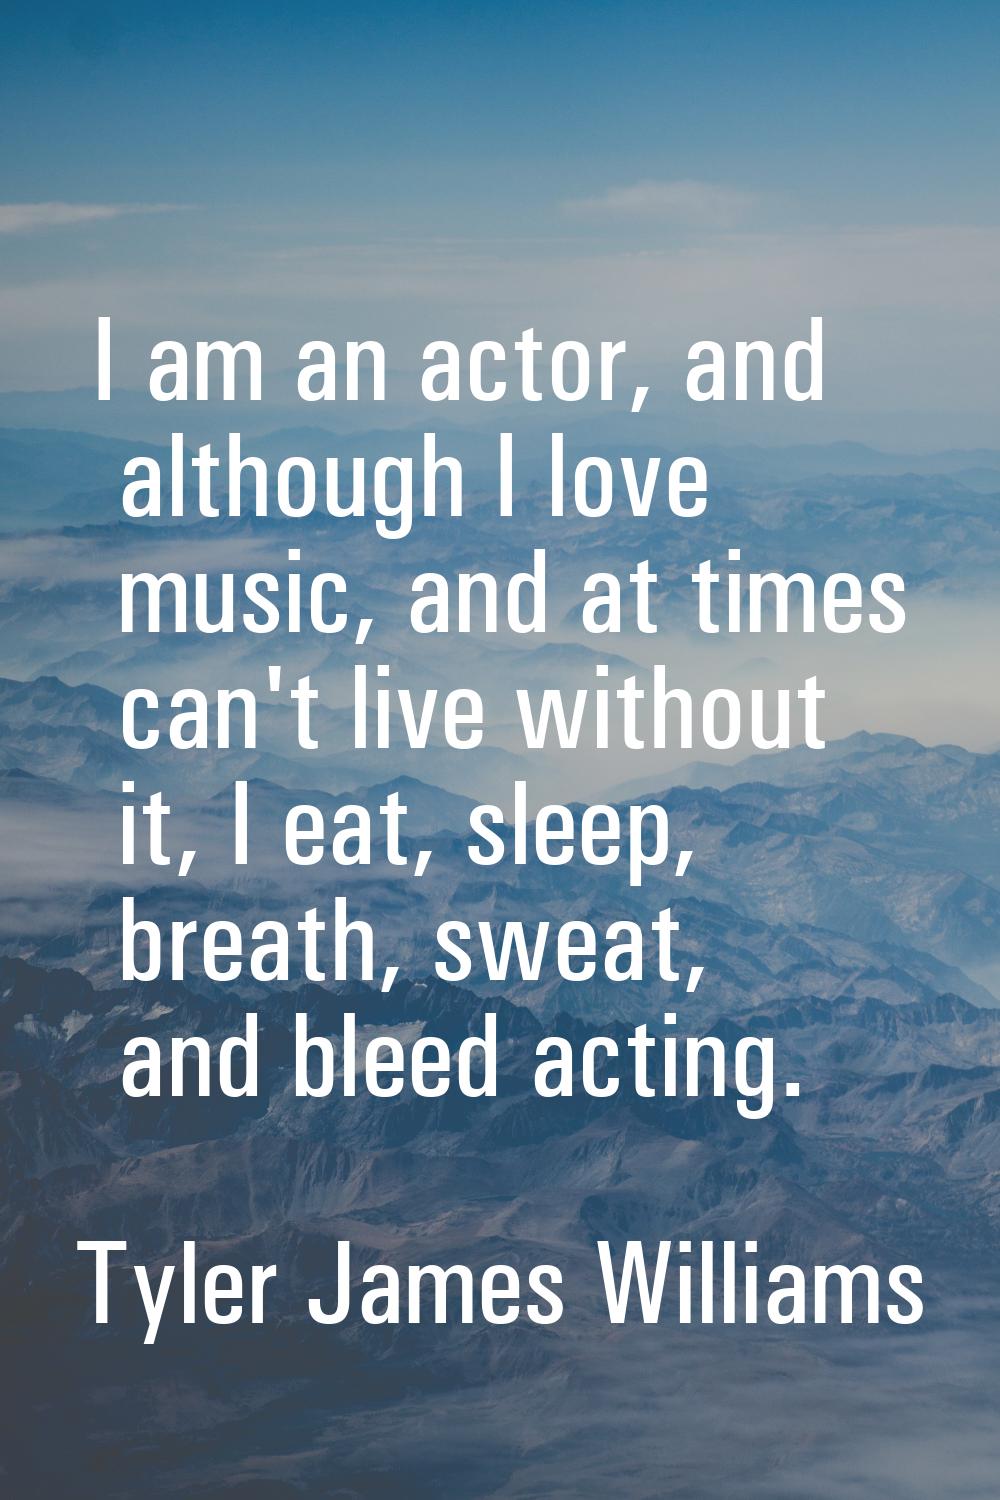 I am an actor, and although I love music, and at times can't live without it, I eat, sleep, breath,